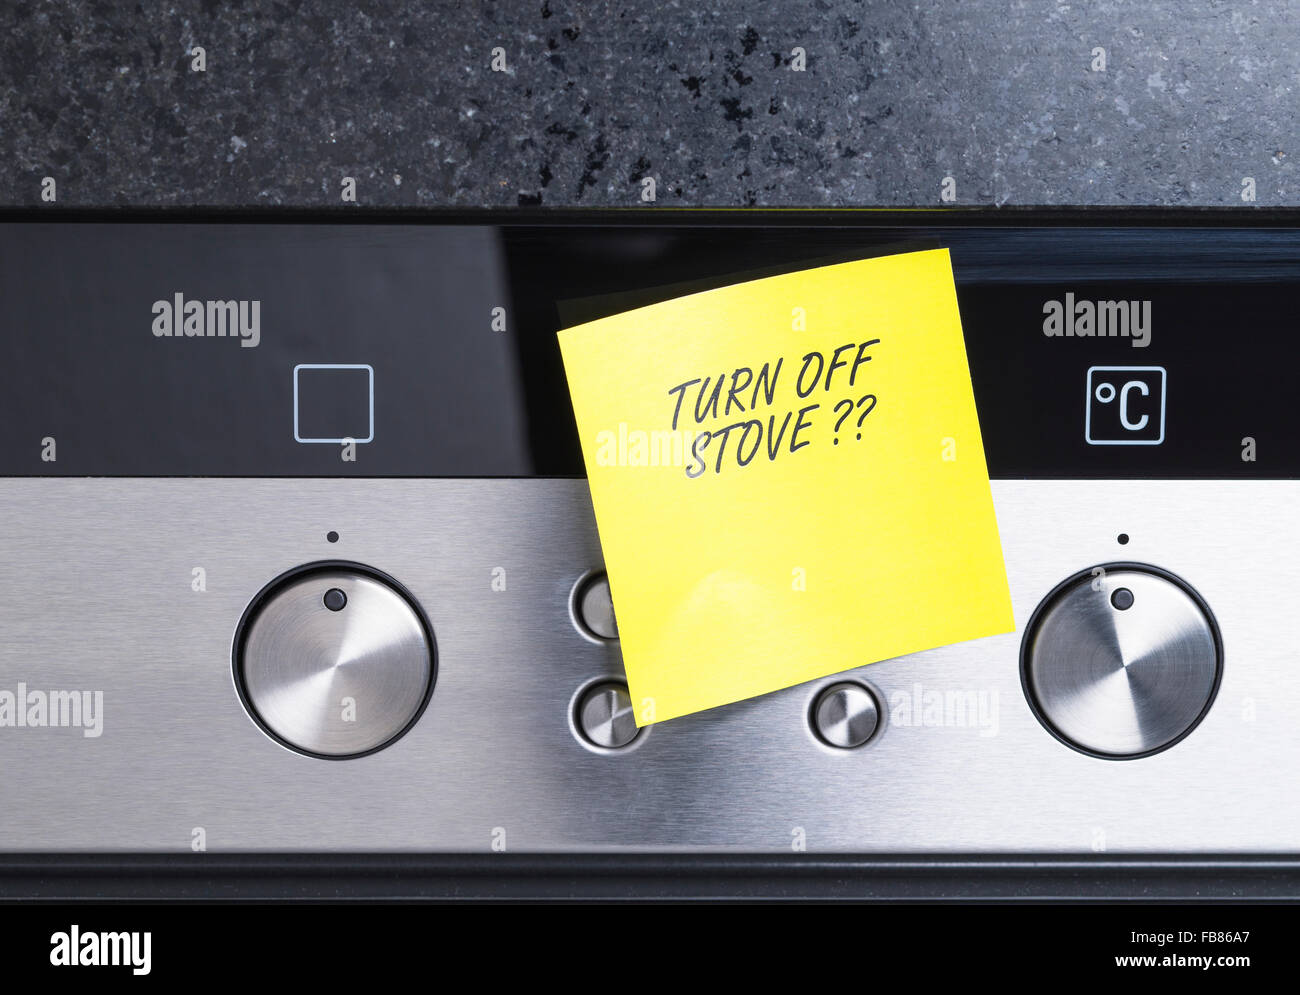 Image shows an notification at an electric kitchen stove Stock Photo